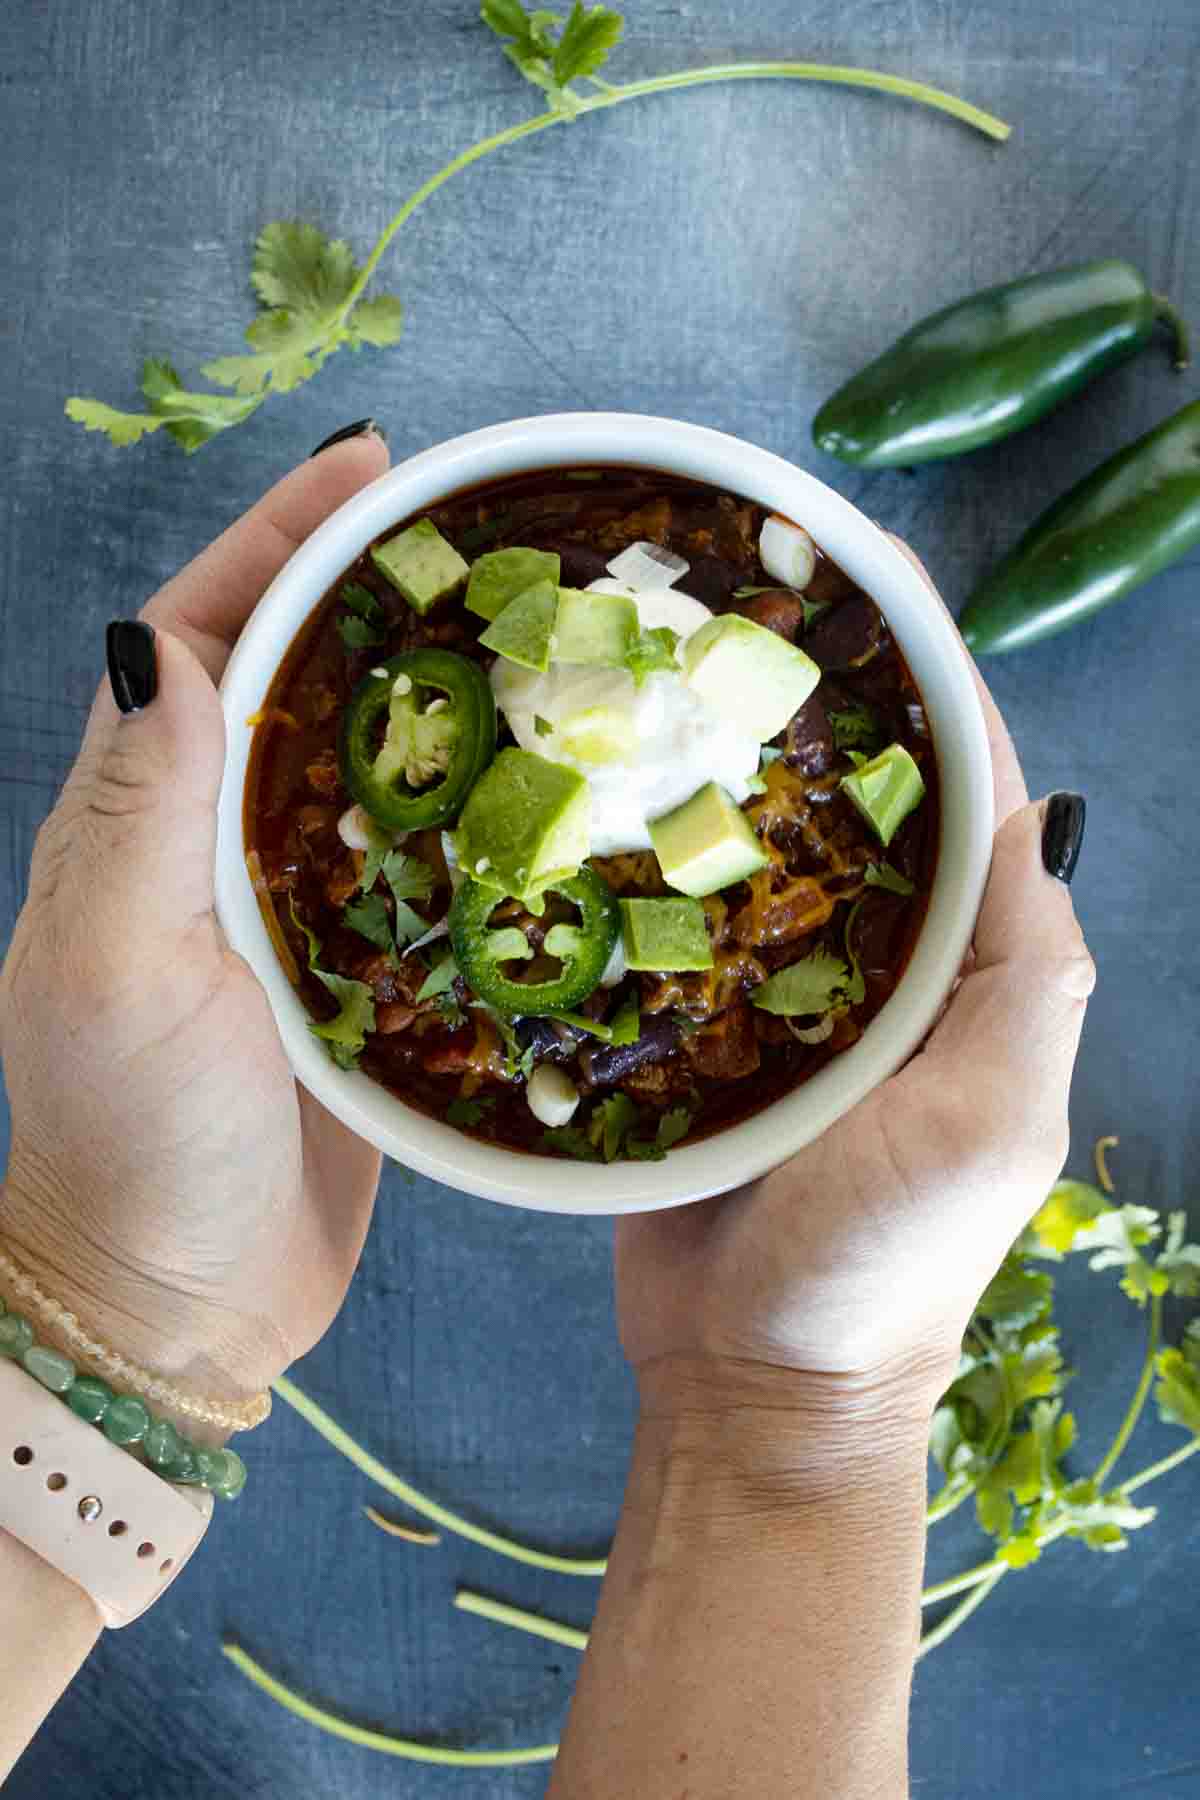 9x13 Crockpot Recipes To Make Your Life Easier